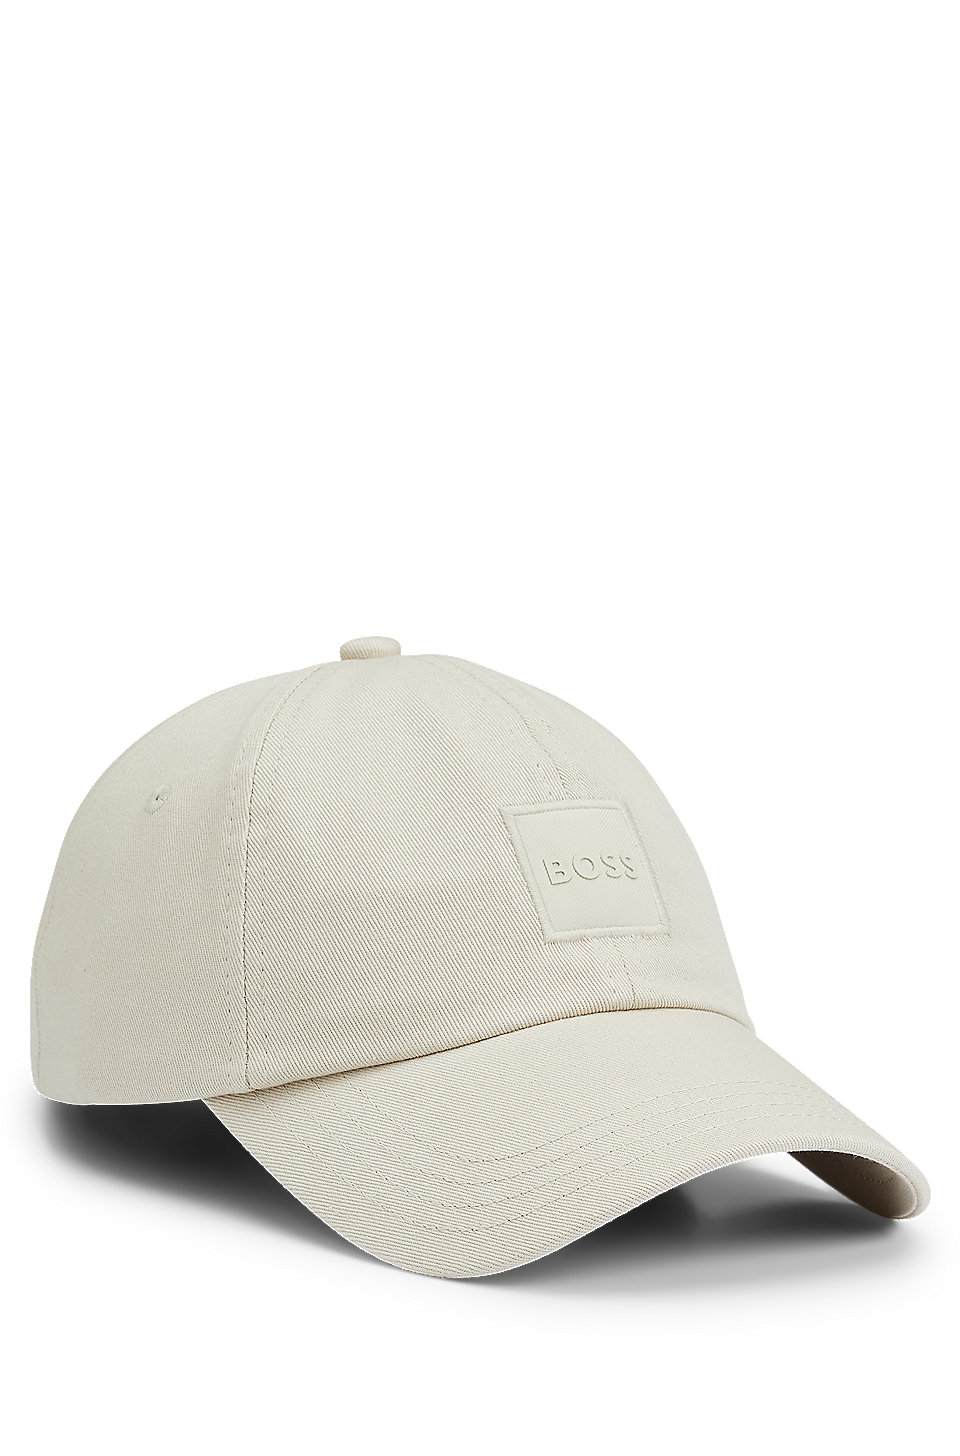 BOSS - Cotton-twill cap with tonal logo patch